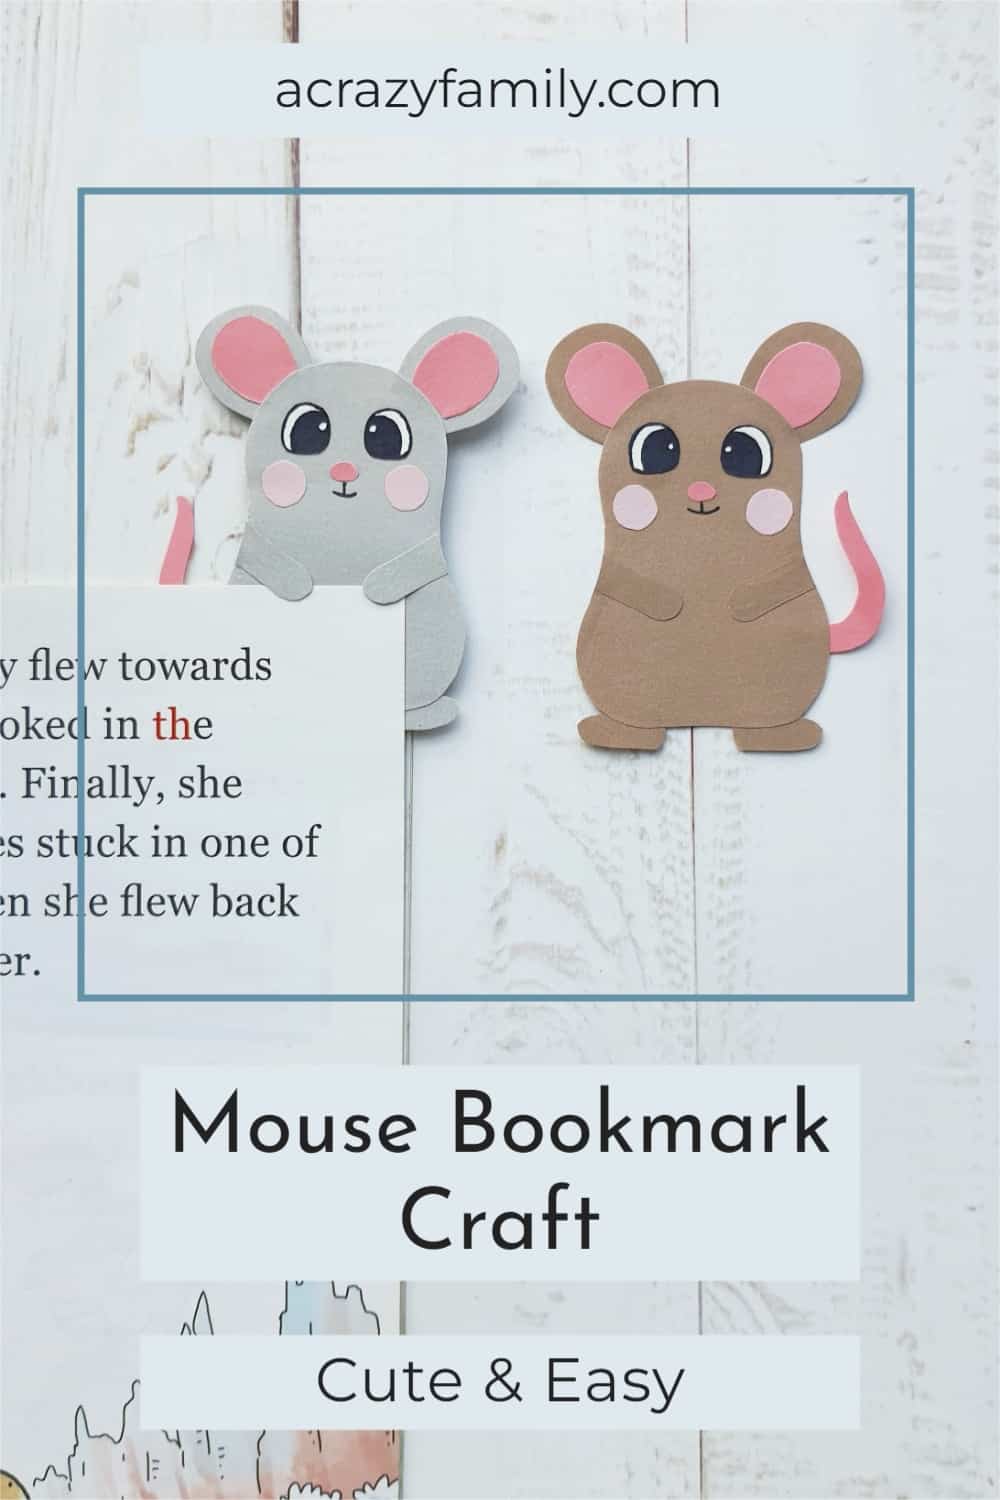 Mouse Bookmark Craft 2